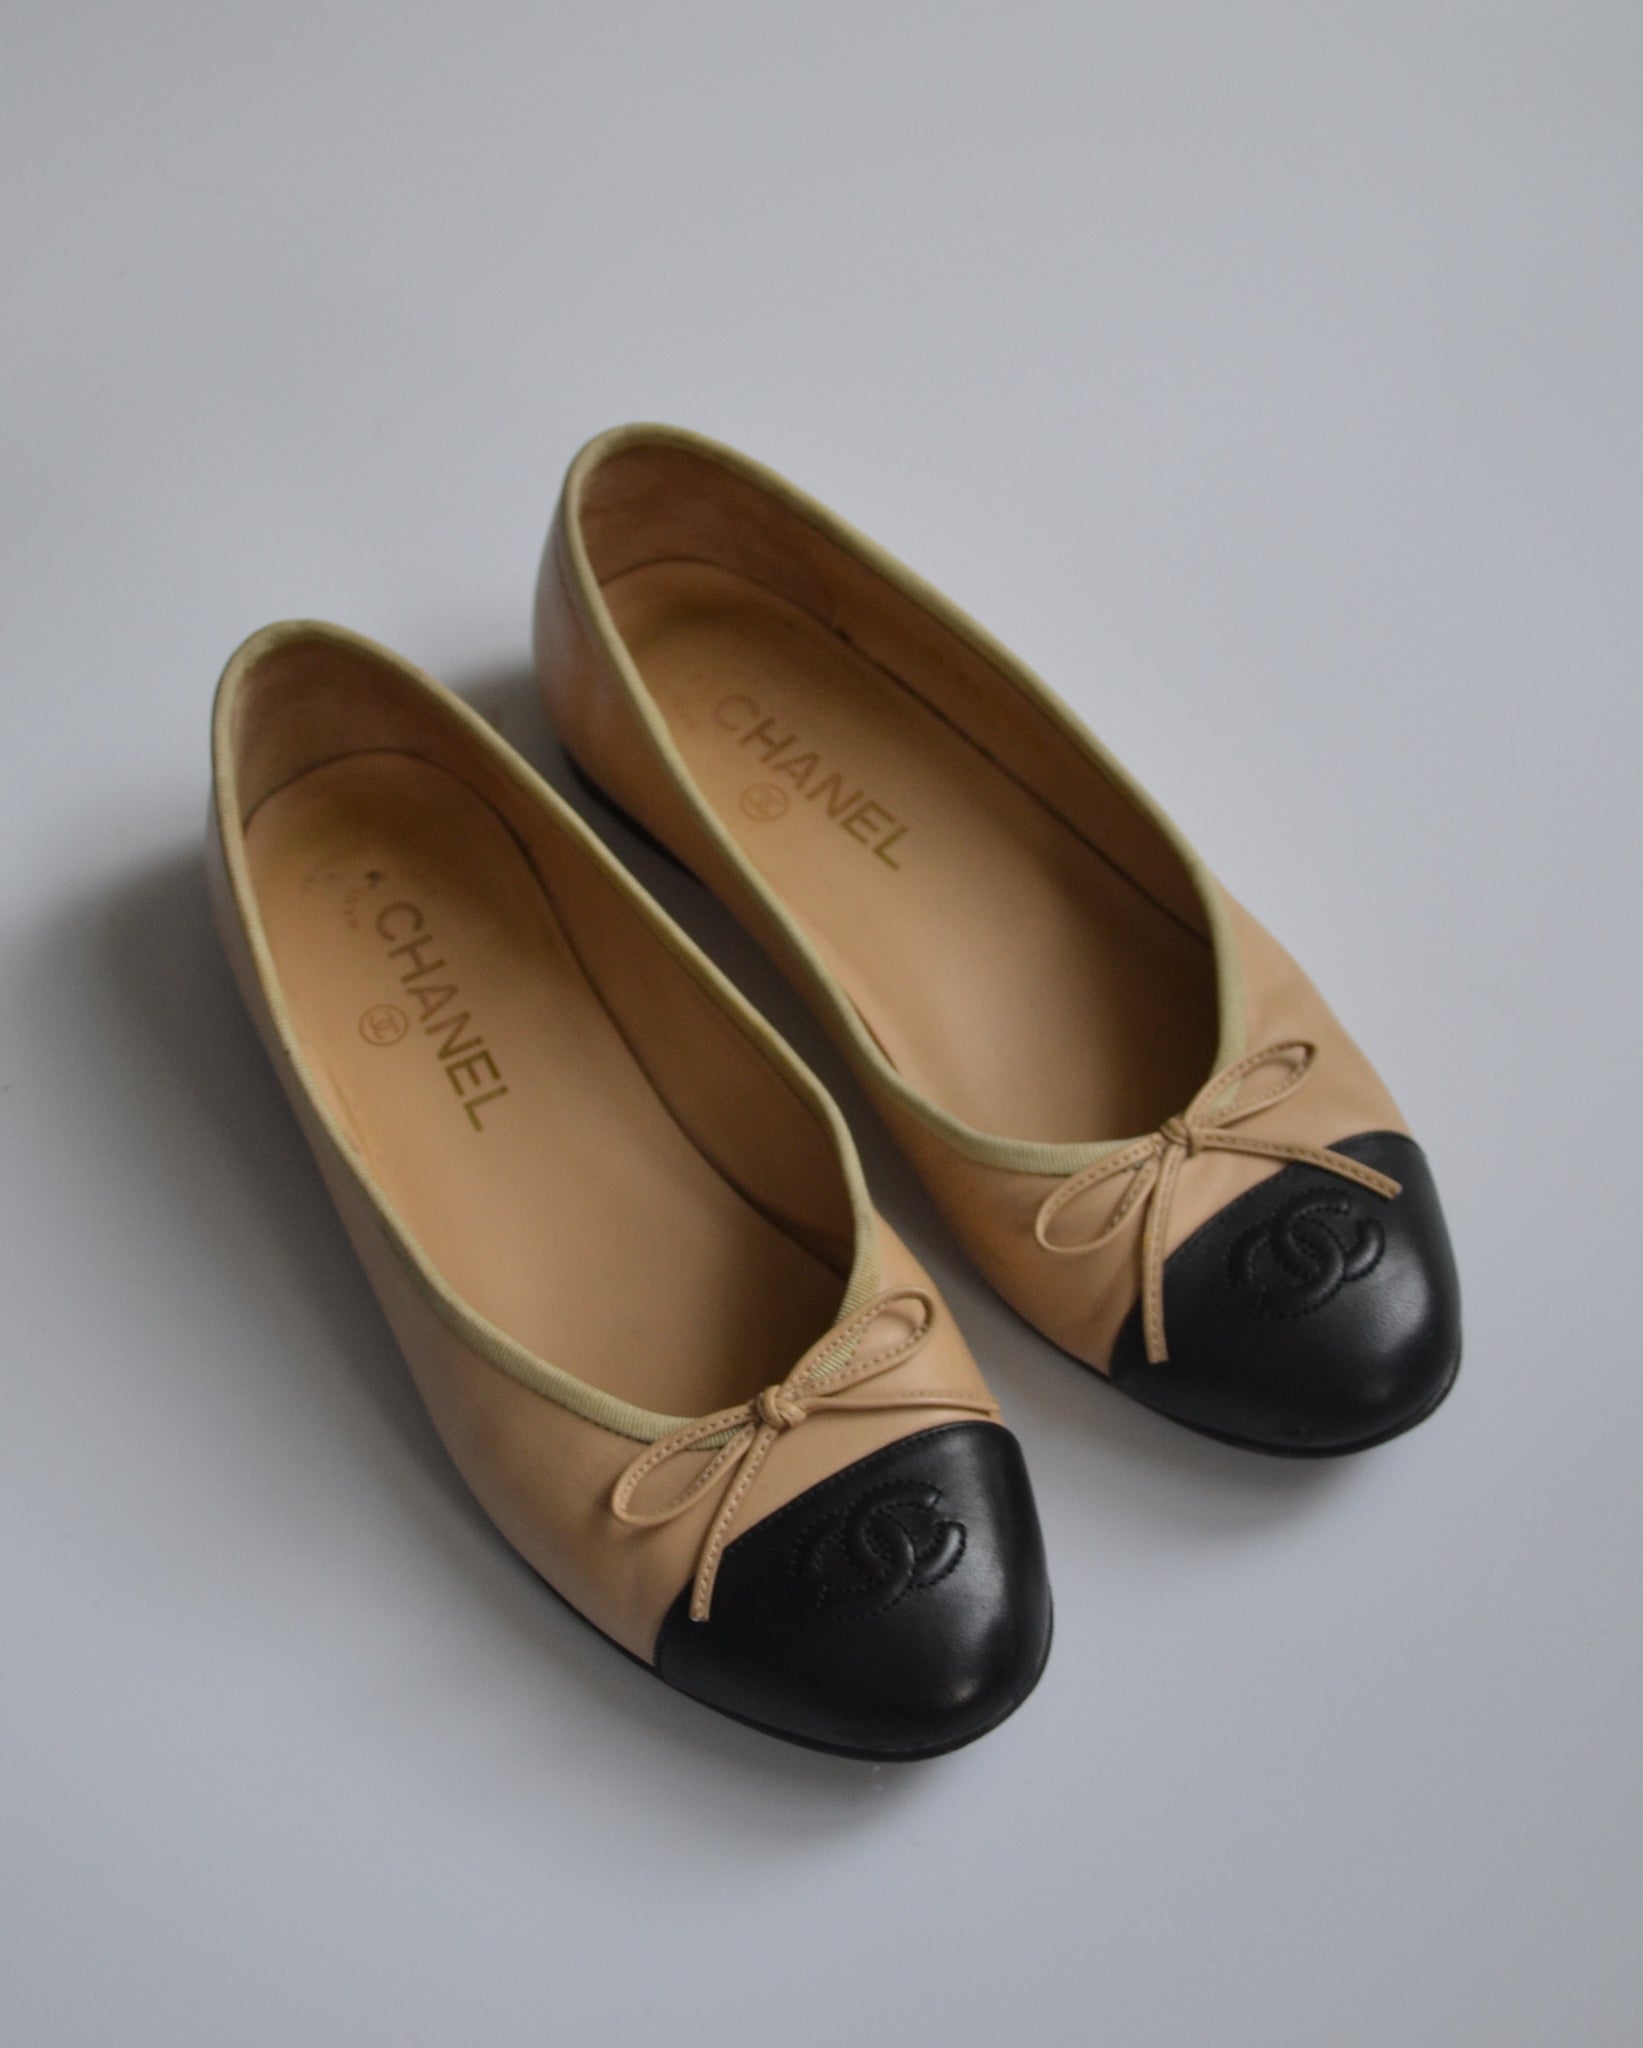 Lot 359 - Chanel Two-Tone Ballet Flats, ice blue and